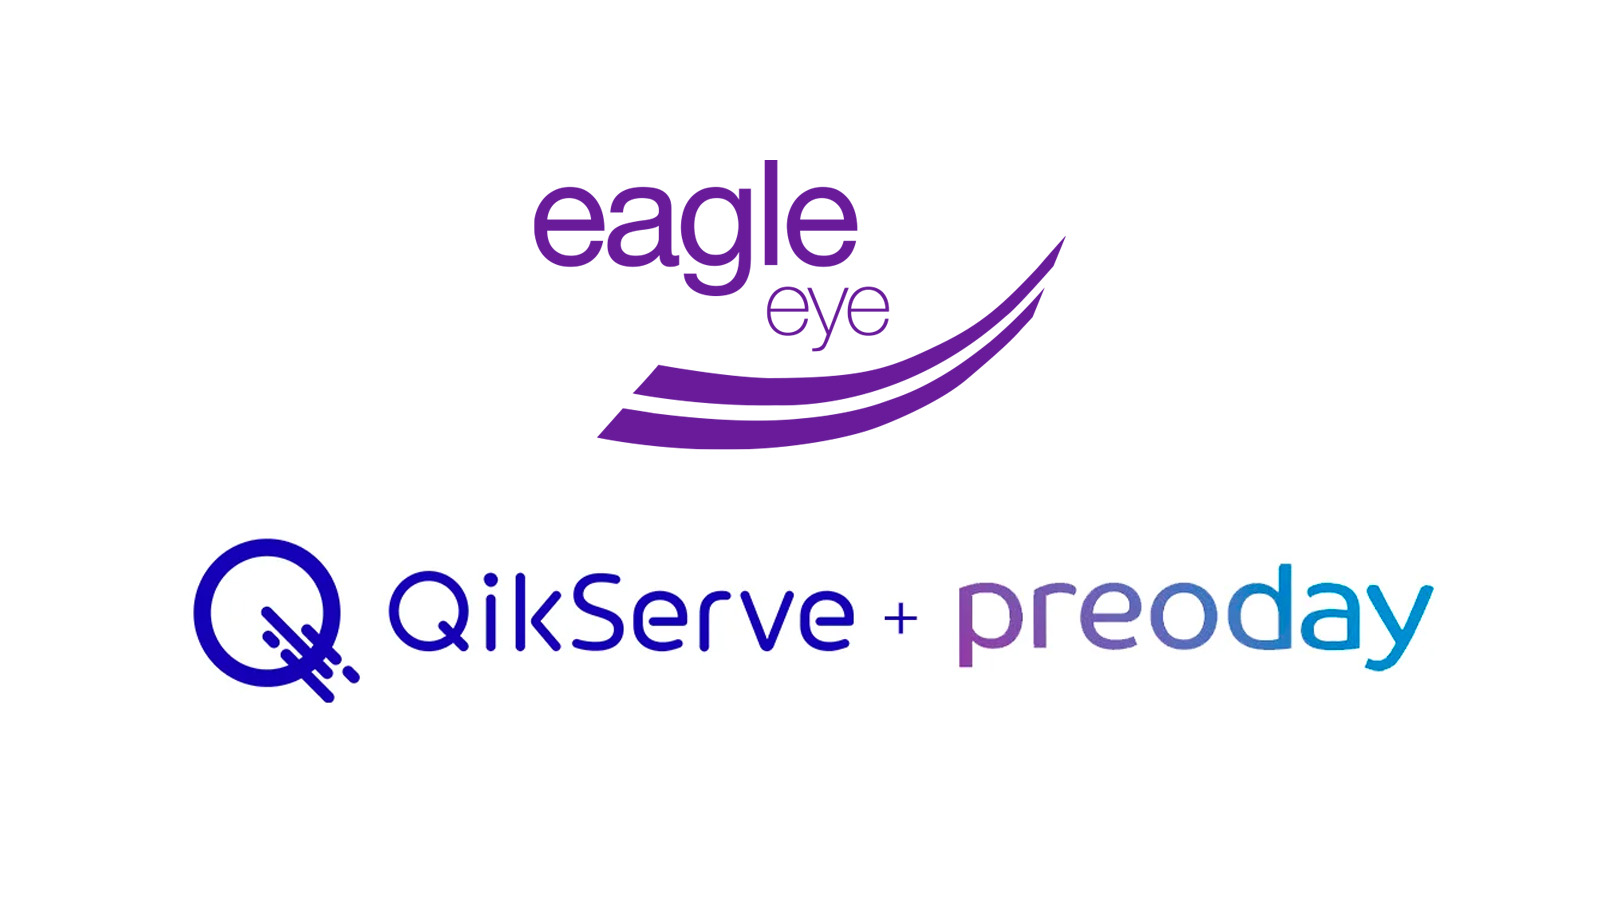 Eagle Eye partners with Preoday, to offer digital ordering and loyalty via mobile apps